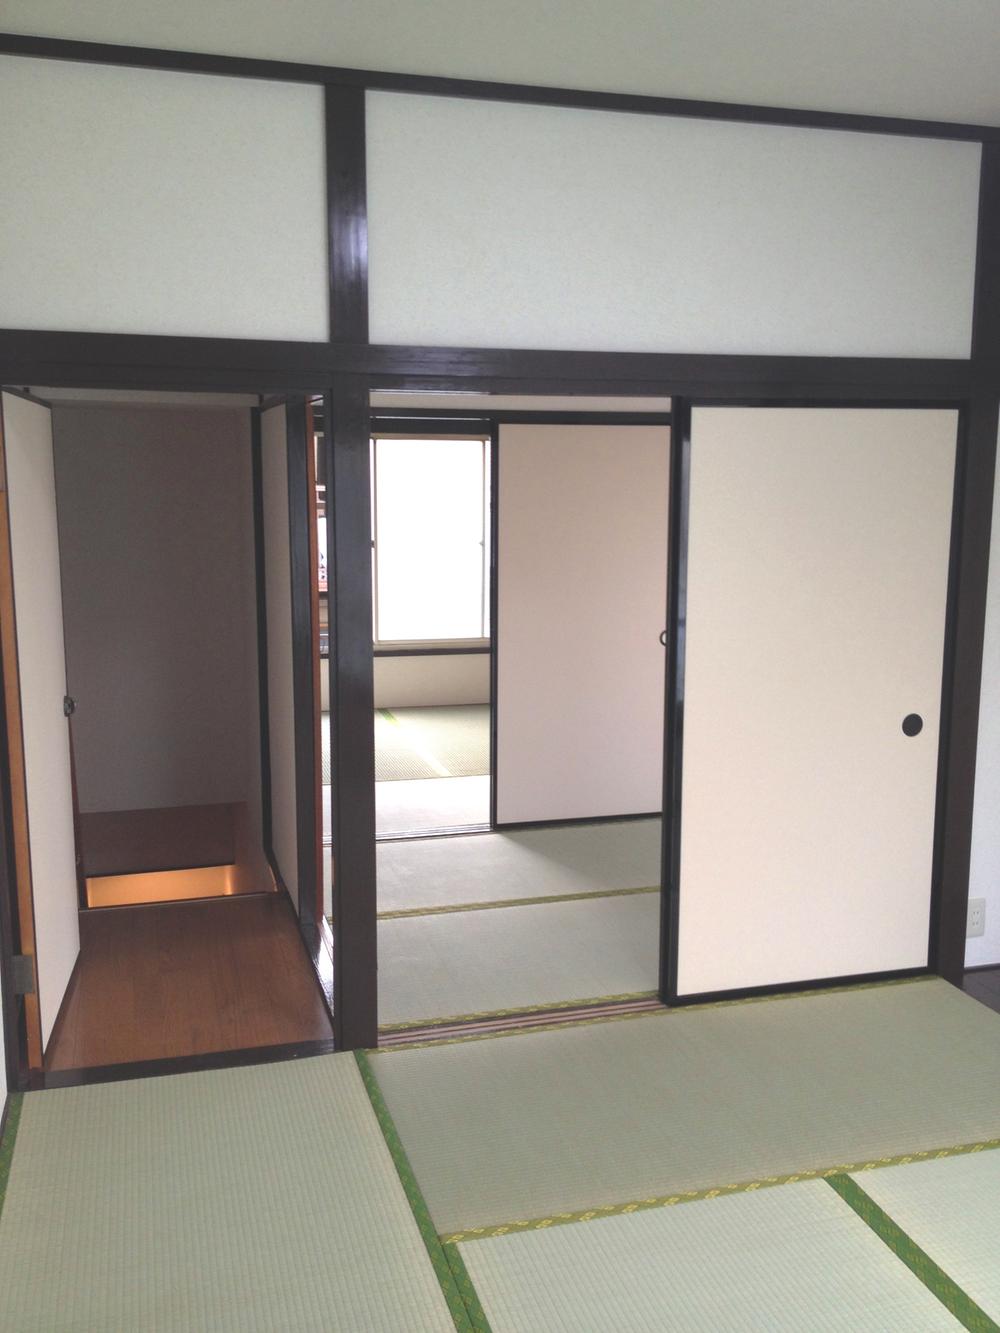 Non-living room. Second floor Japanese-style room renovated